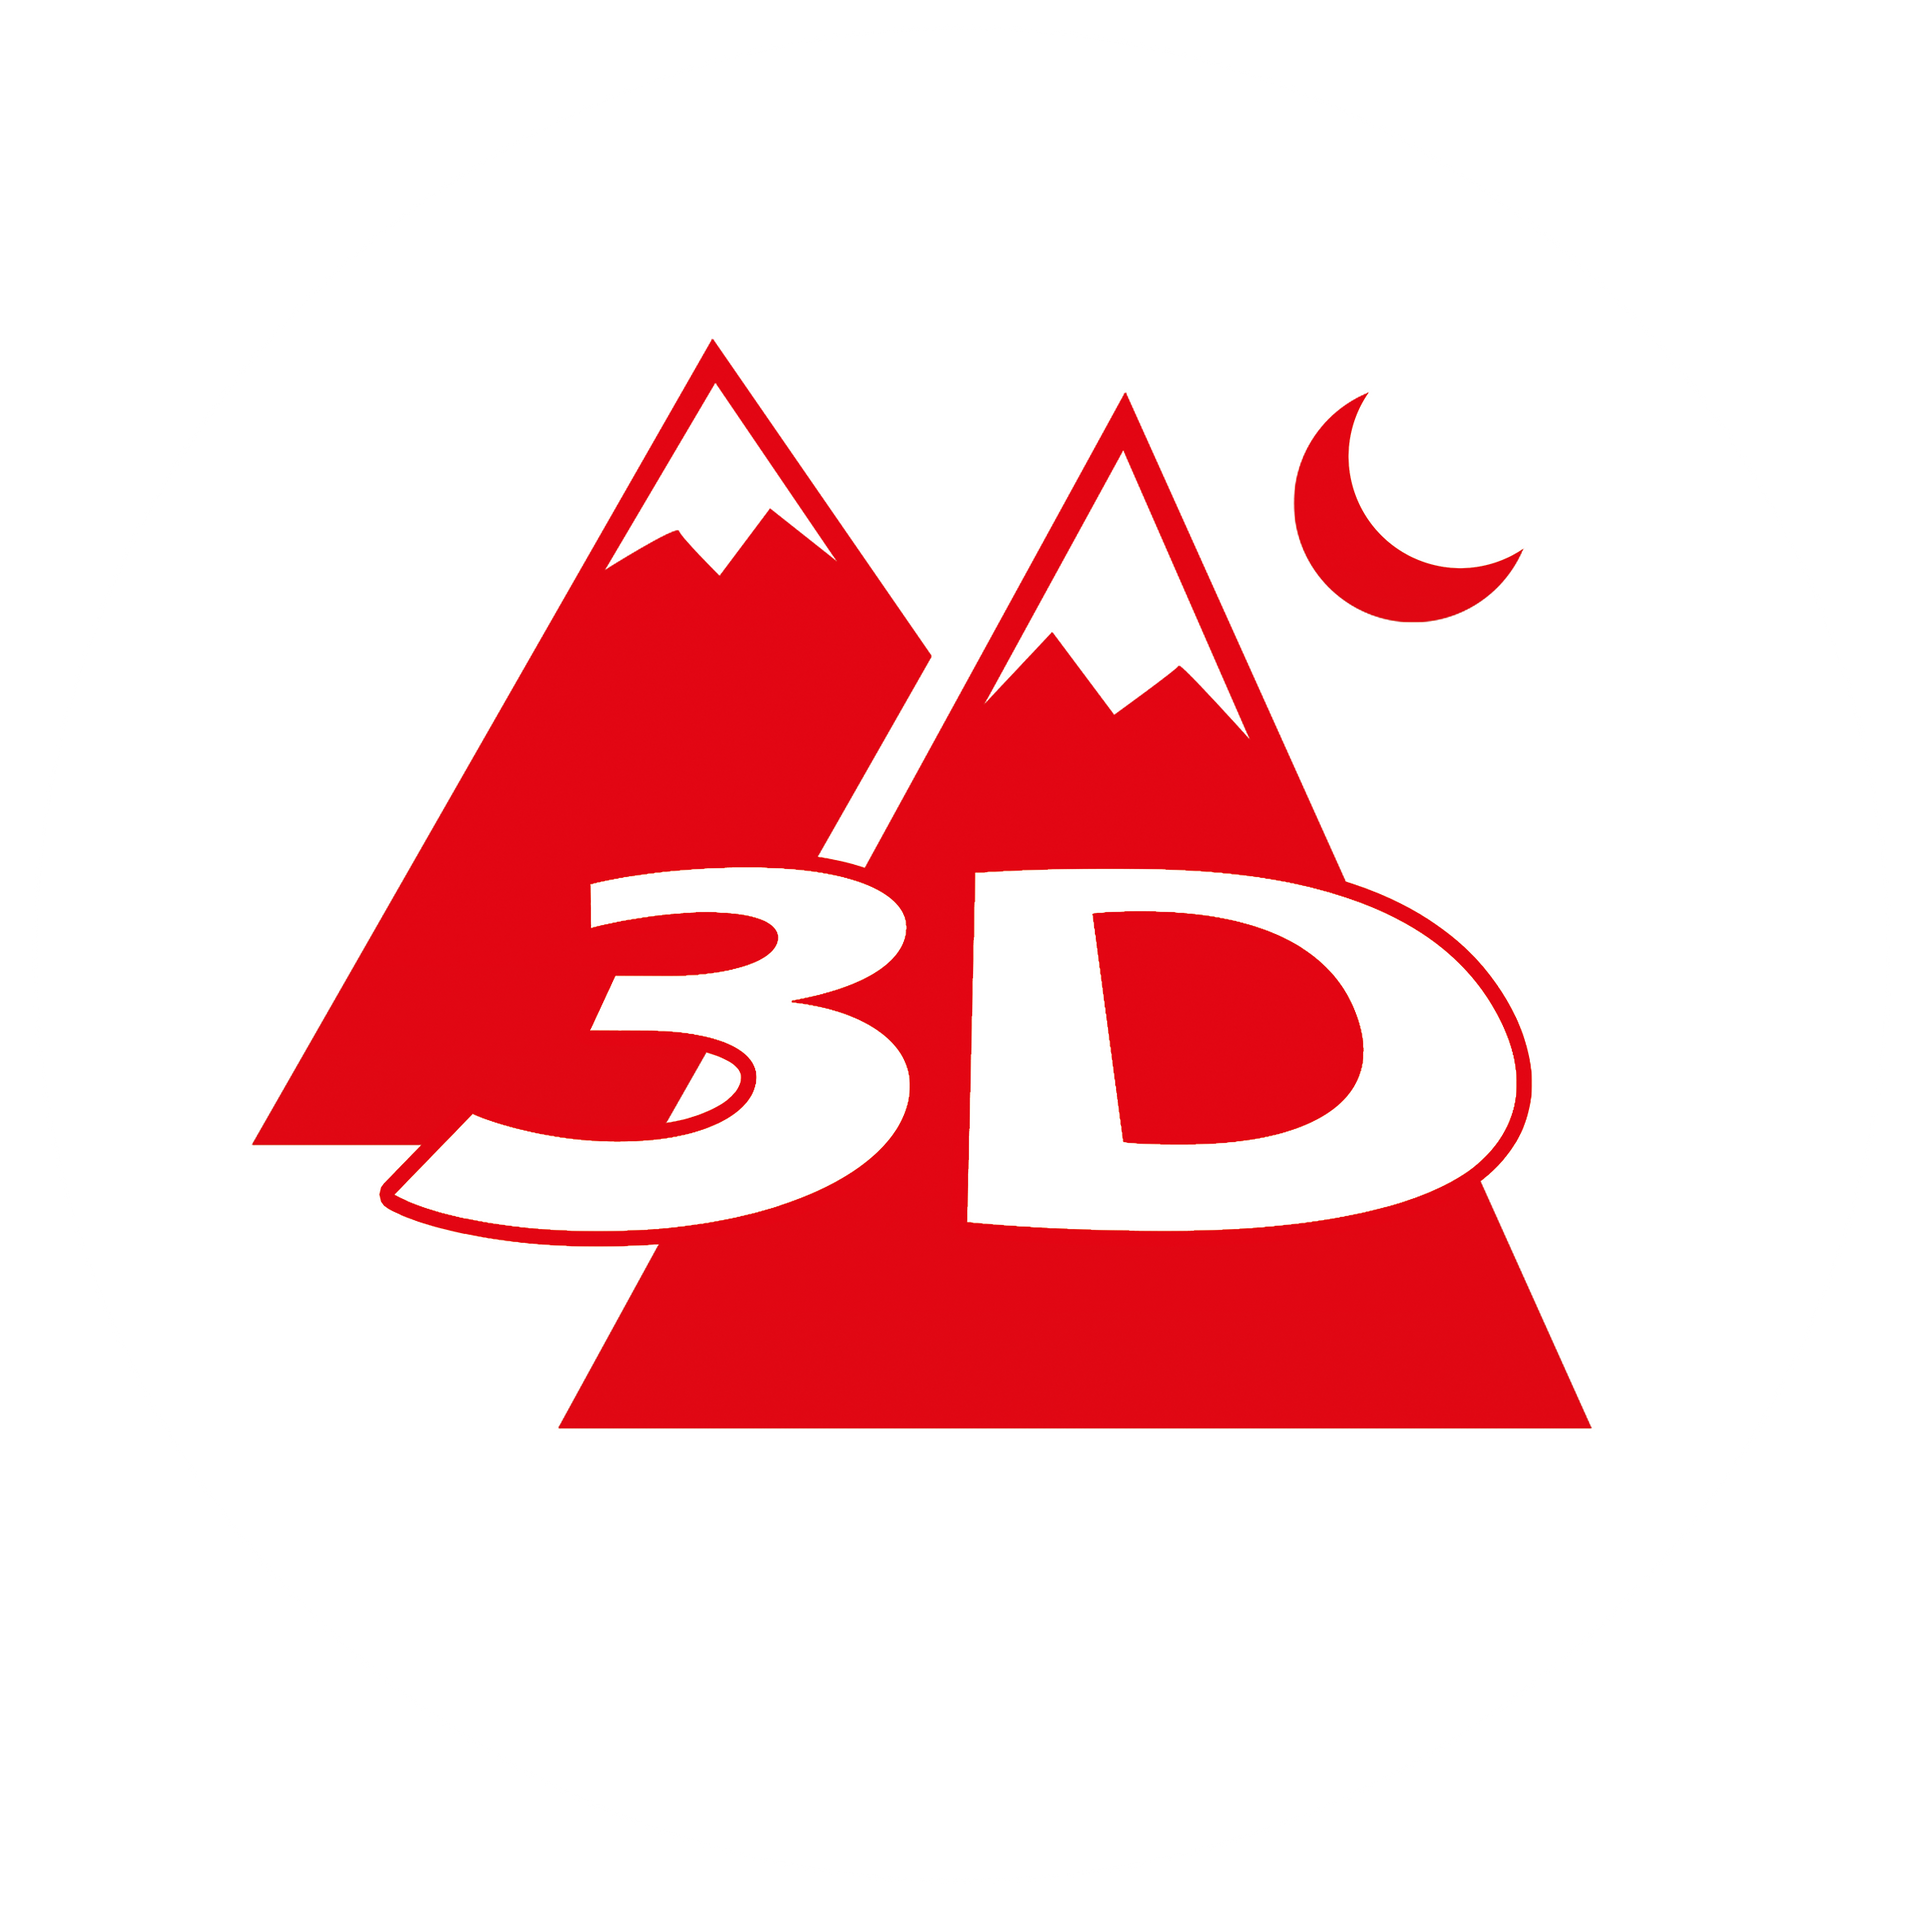 a red and white 3d logo with mountains and a crescent moon